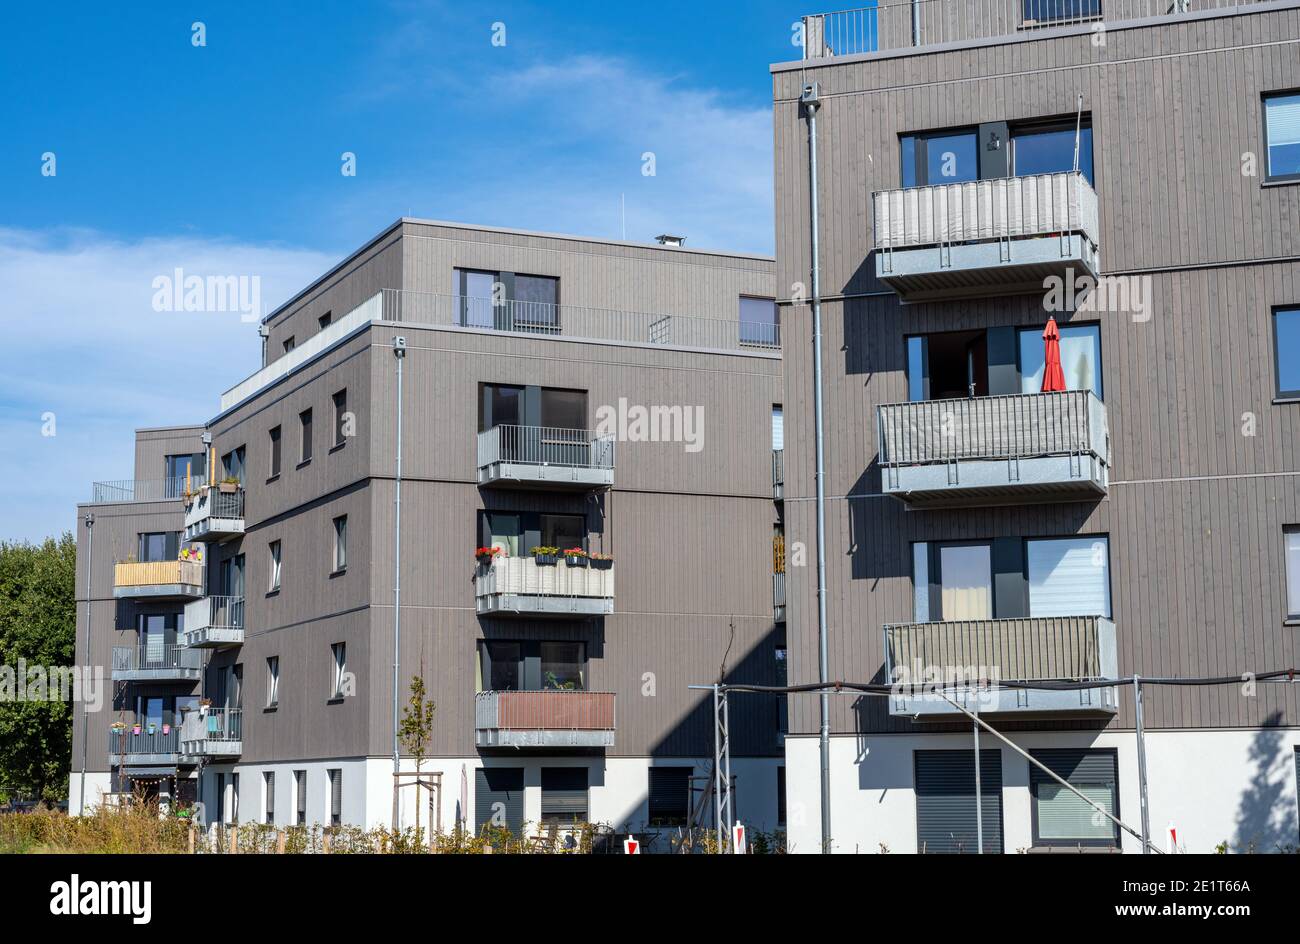 Modern apartment houses with grey facades seen in Berlin, Germany Stock Photo